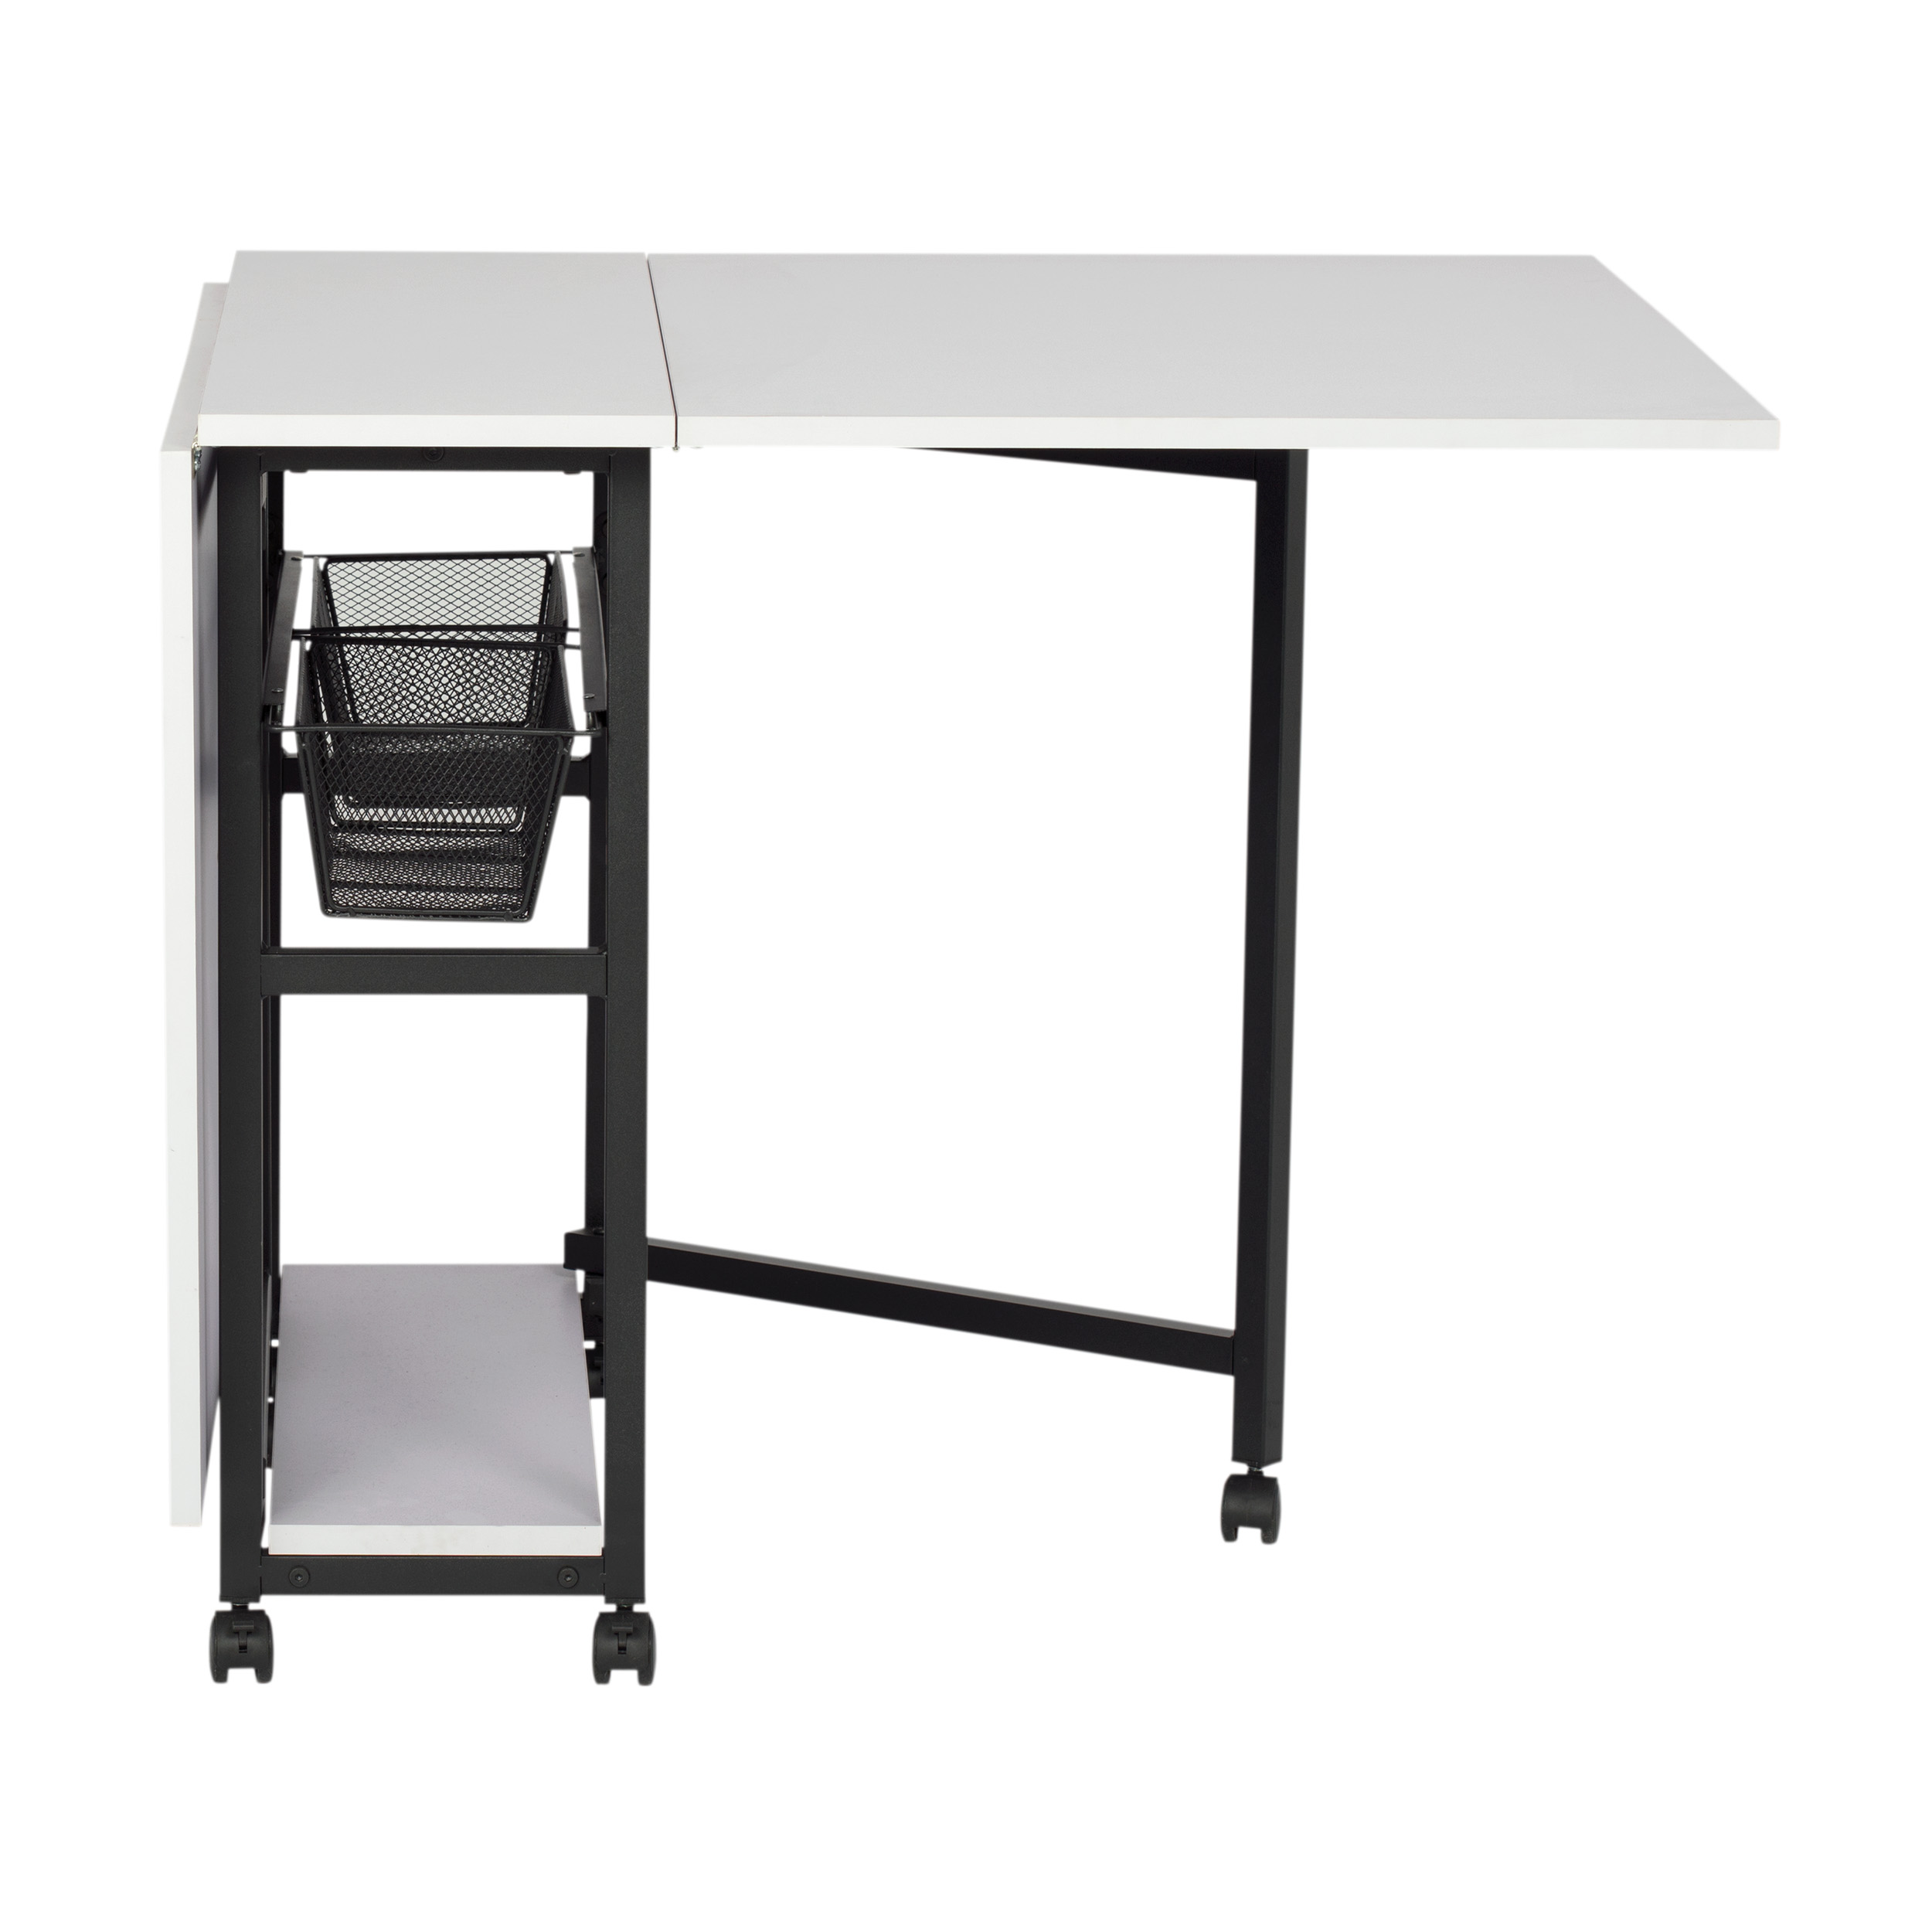 Sew Ready Mobile Fabric Cutting Table with Storage 30" H in Charcoal/White - image 4 of 11